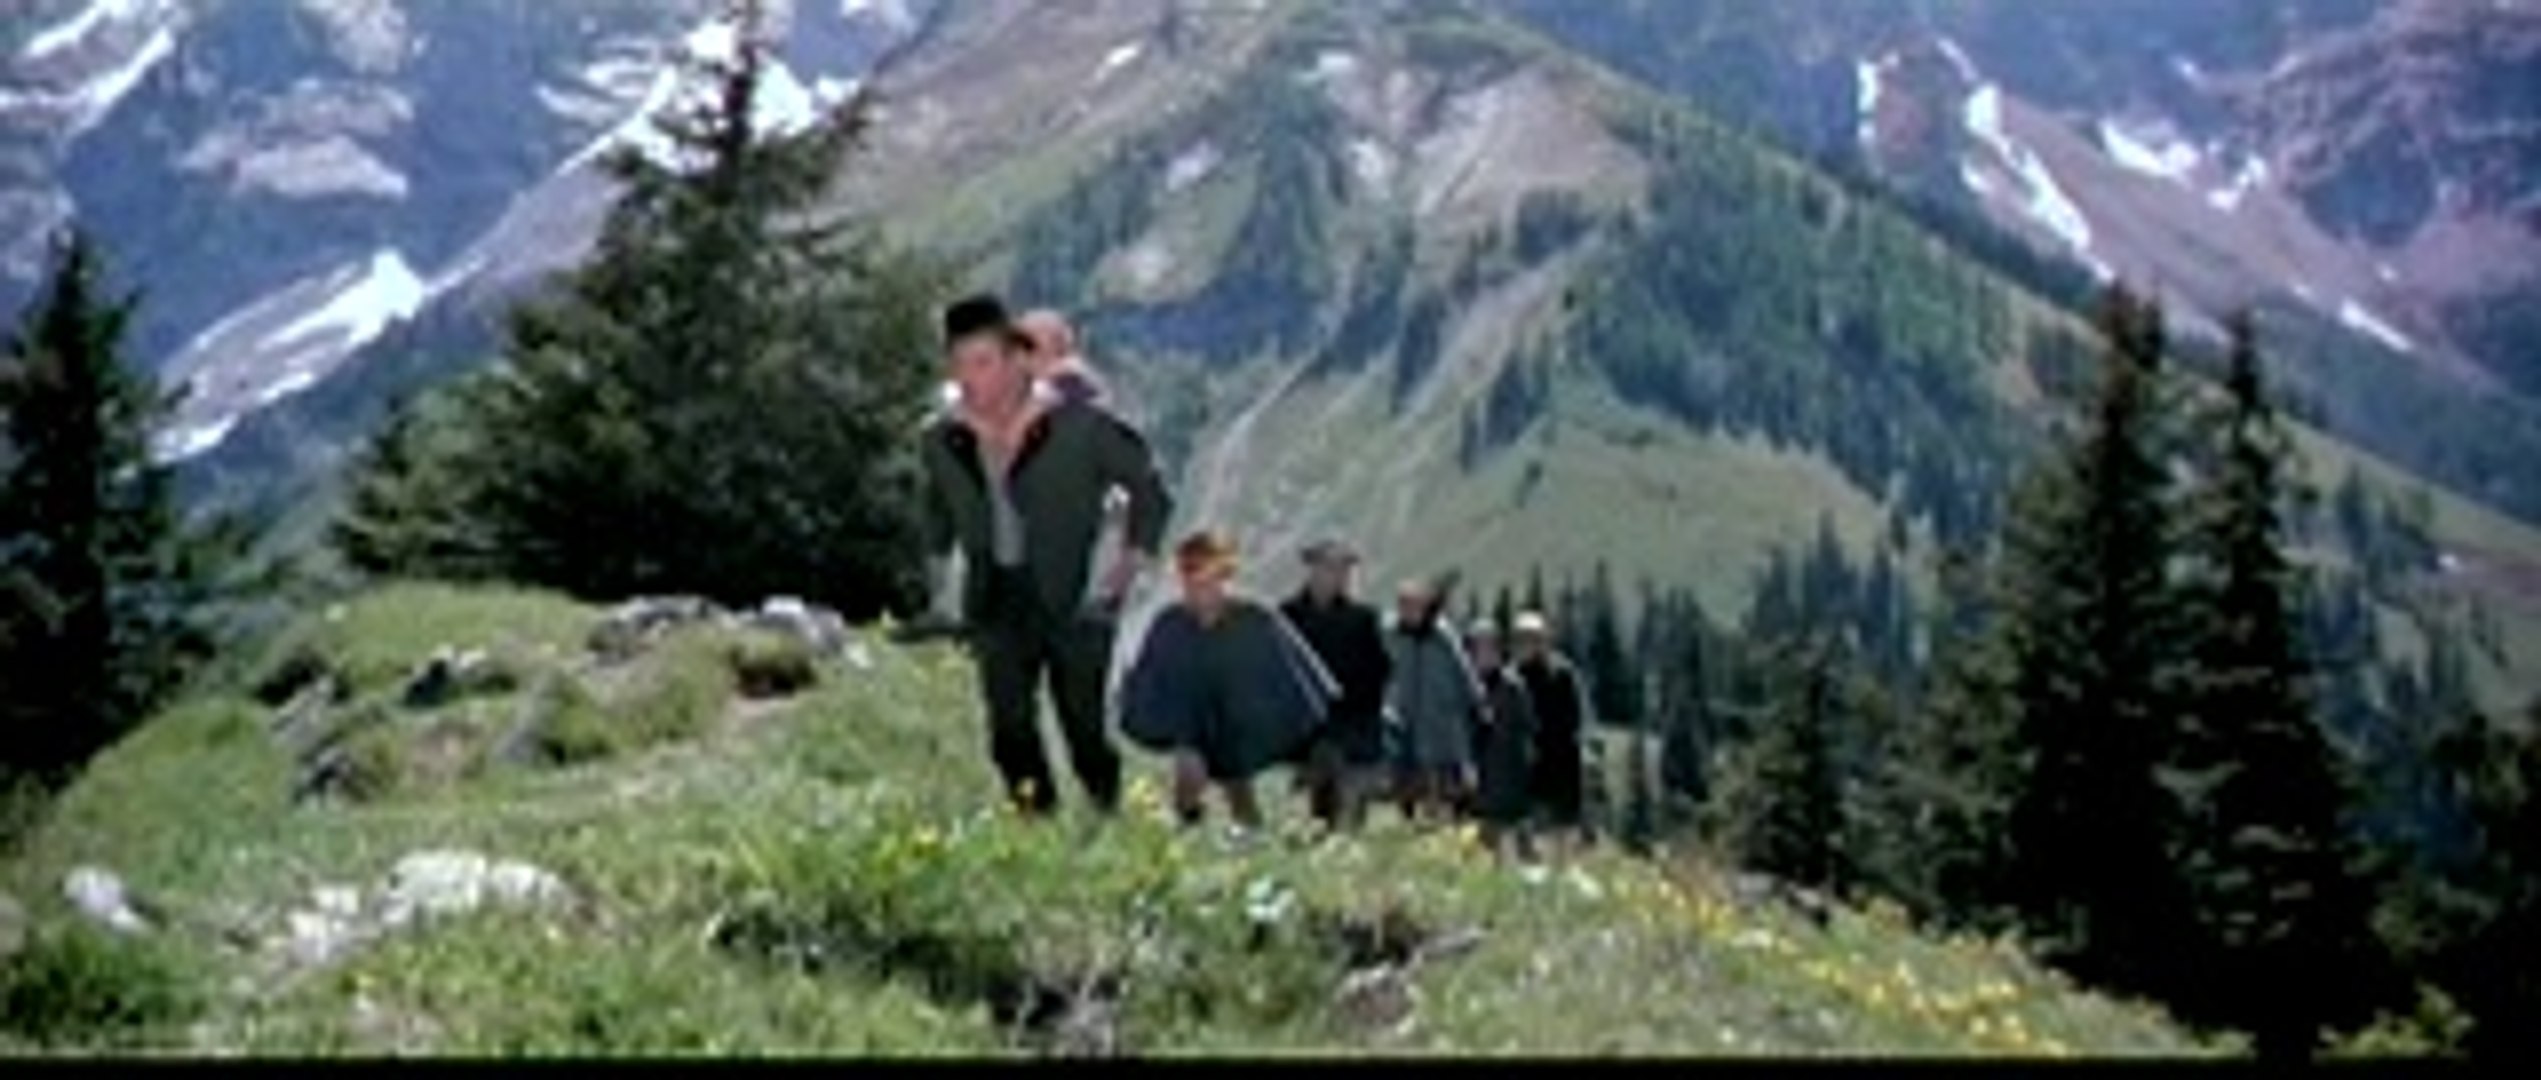 The Escape Finale Climb Every Mountain Reprise The Sound Of Music Italian Dubbing Video Dailymotion